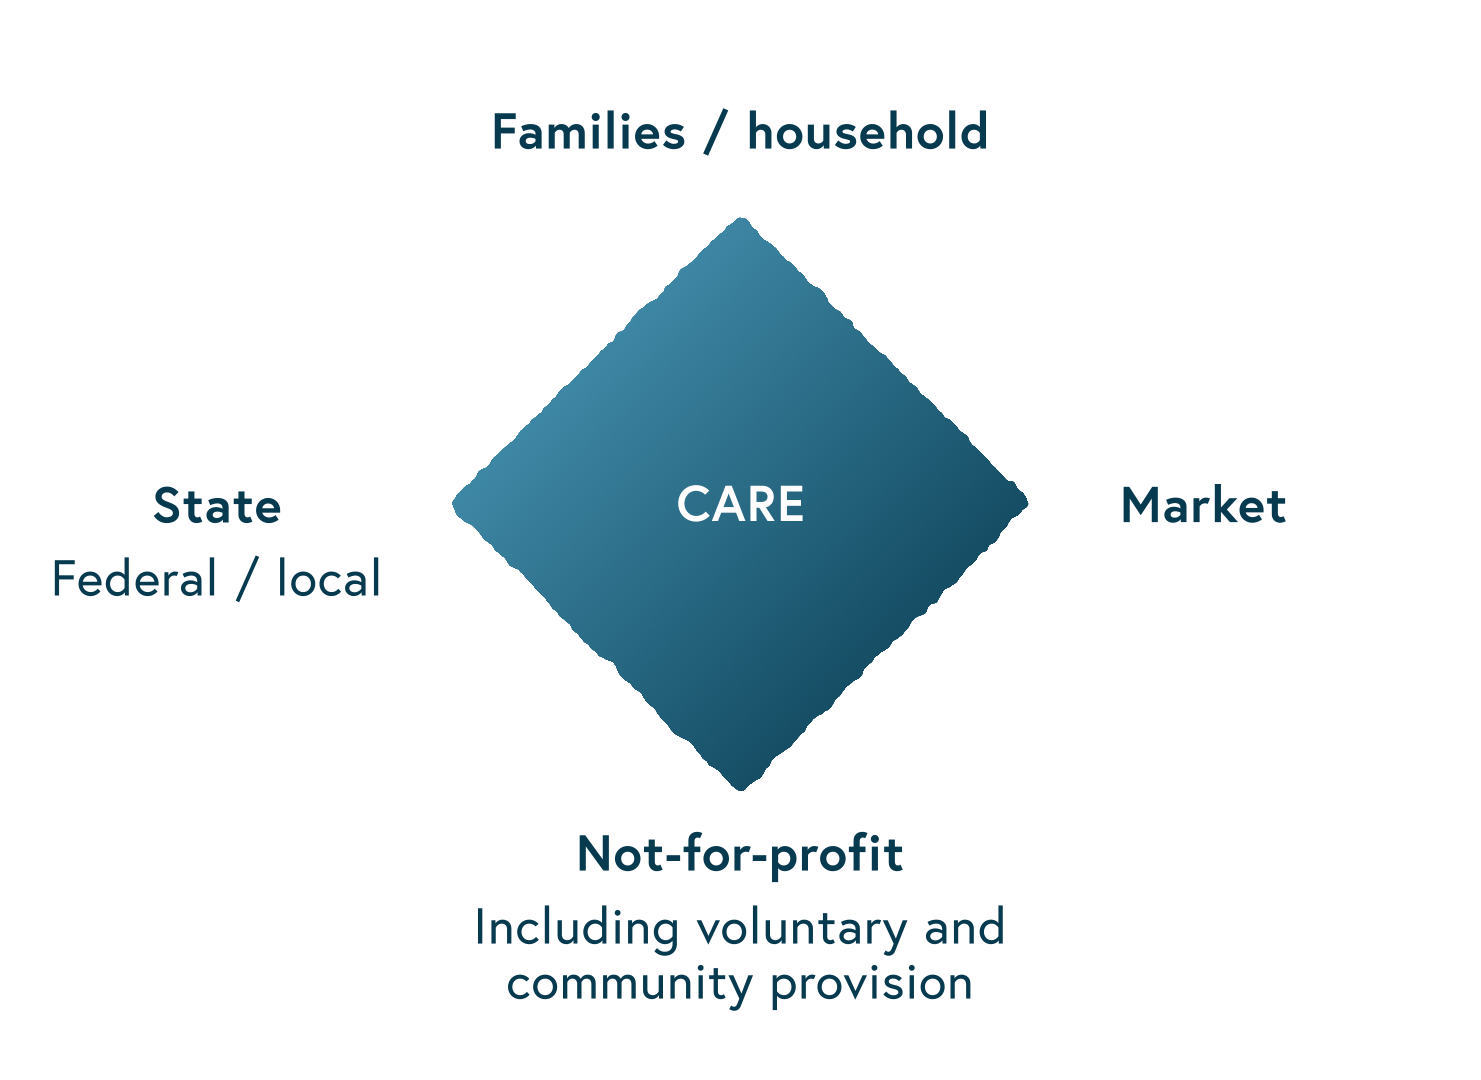 Picture showing the Care Diamond as a square standing on one of its corners. Going clockwise from the corner left (position 9 o’clock) the captions read as follows. Left corner: “State: Federal and local”; top corner: “Families/household”; right corner: “Market”, and bottom corner “Not-for-profit, including voluntary and community provisions.”